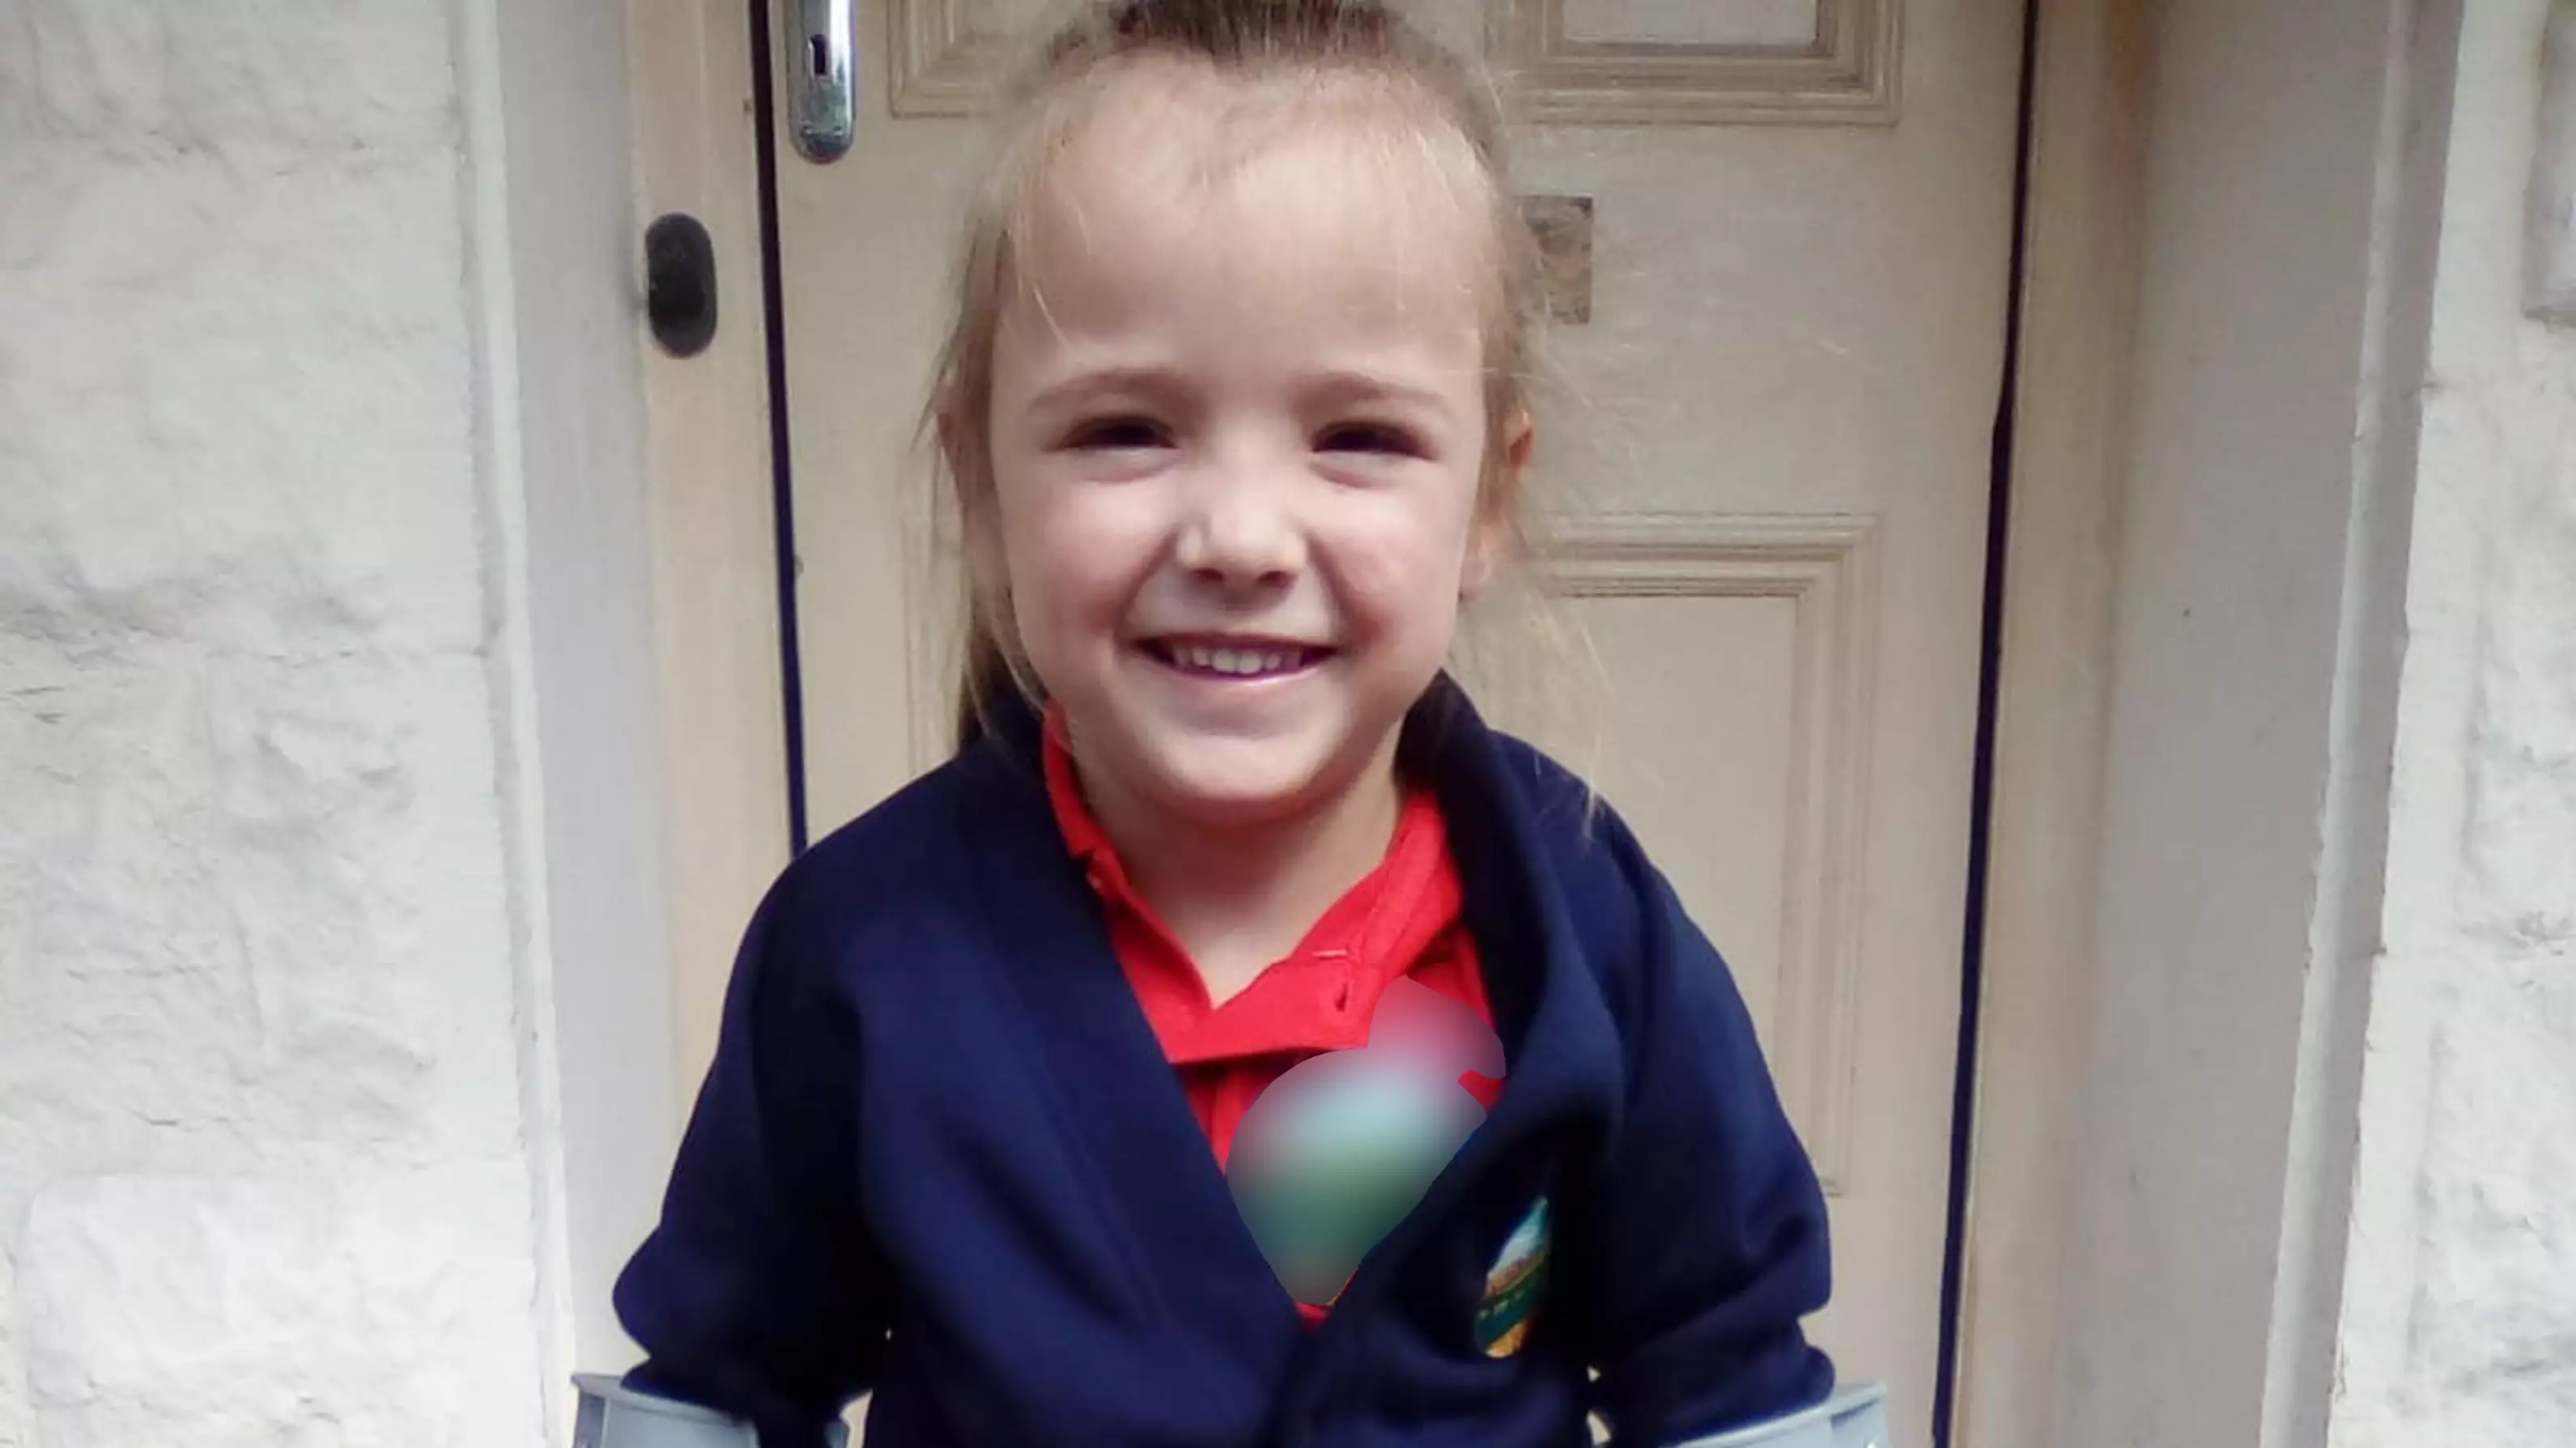 Girl With Cerebral Palsy Takes First Unaided Steps On First Day Of School In Emotional Video